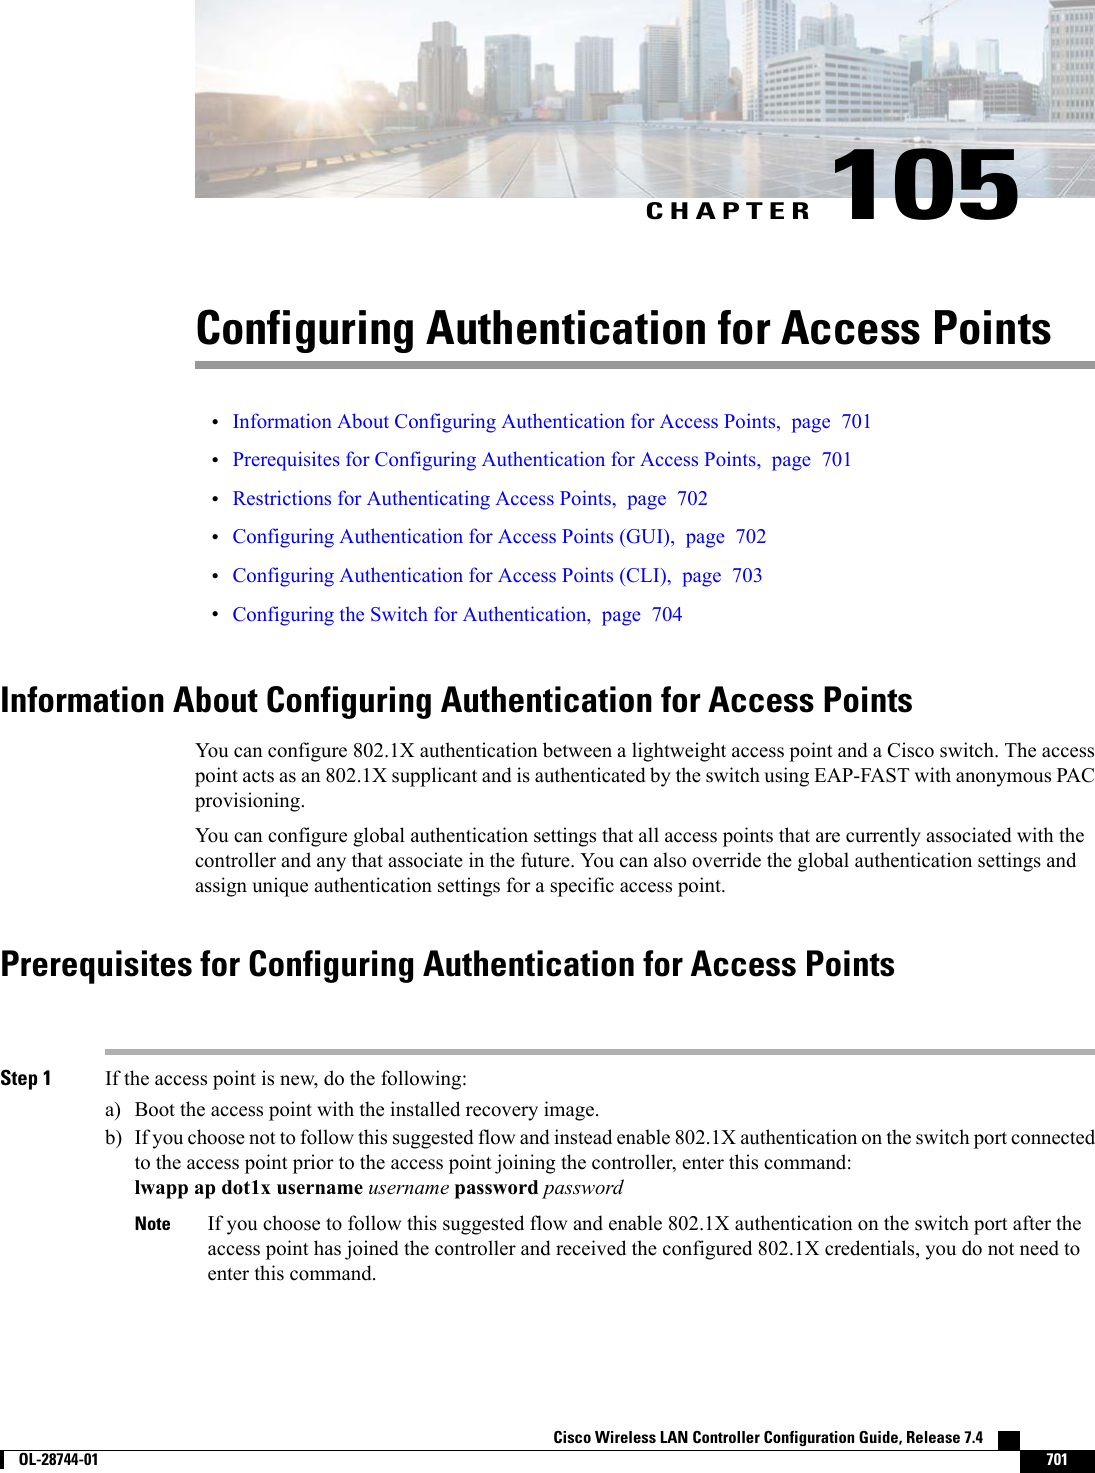 CHAPTER 105Configuring Authentication for Access Points•Information About Configuring Authentication for Access Points, page 701•Prerequisites for Configuring Authentication for Access Points, page 701•Restrictions for Authenticating Access Points, page 702•Configuring Authentication for Access Points (GUI), page 702•Configuring Authentication for Access Points (CLI), page 703•Configuring the Switch for Authentication, page 704Information About Configuring Authentication for Access PointsYou can configure 802.1X authentication between a lightweight access point and a Cisco switch. The accesspoint acts as an 802.1X supplicant and is authenticated by the switch using EAP-FAST with anonymous PACprovisioning.You can configure global authentication settings that all access points that are currently associated with thecontroller and any that associate in the future. You can also override the global authentication settings andassign unique authentication settings for a specific access point.Prerequisites for Configuring Authentication for Access PointsStep 1 If the access point is new, do the following:a) Boot the access point with the installed recovery image.b) If you choose not to follow this suggested flow and instead enable 802.1X authentication on the switch port connectedto the access point prior to the access point joining the controller, enter this command:lwapp ap dot1x username username password passwordIf you choose to follow this suggested flow and enable 802.1X authentication on the switch port after theaccess point has joined the controller and received the configured 802.1X credentials, you do not need toenter this command.NoteCisco Wireless LAN Controller Configuration Guide, Release 7.4        OL-28744-01 701